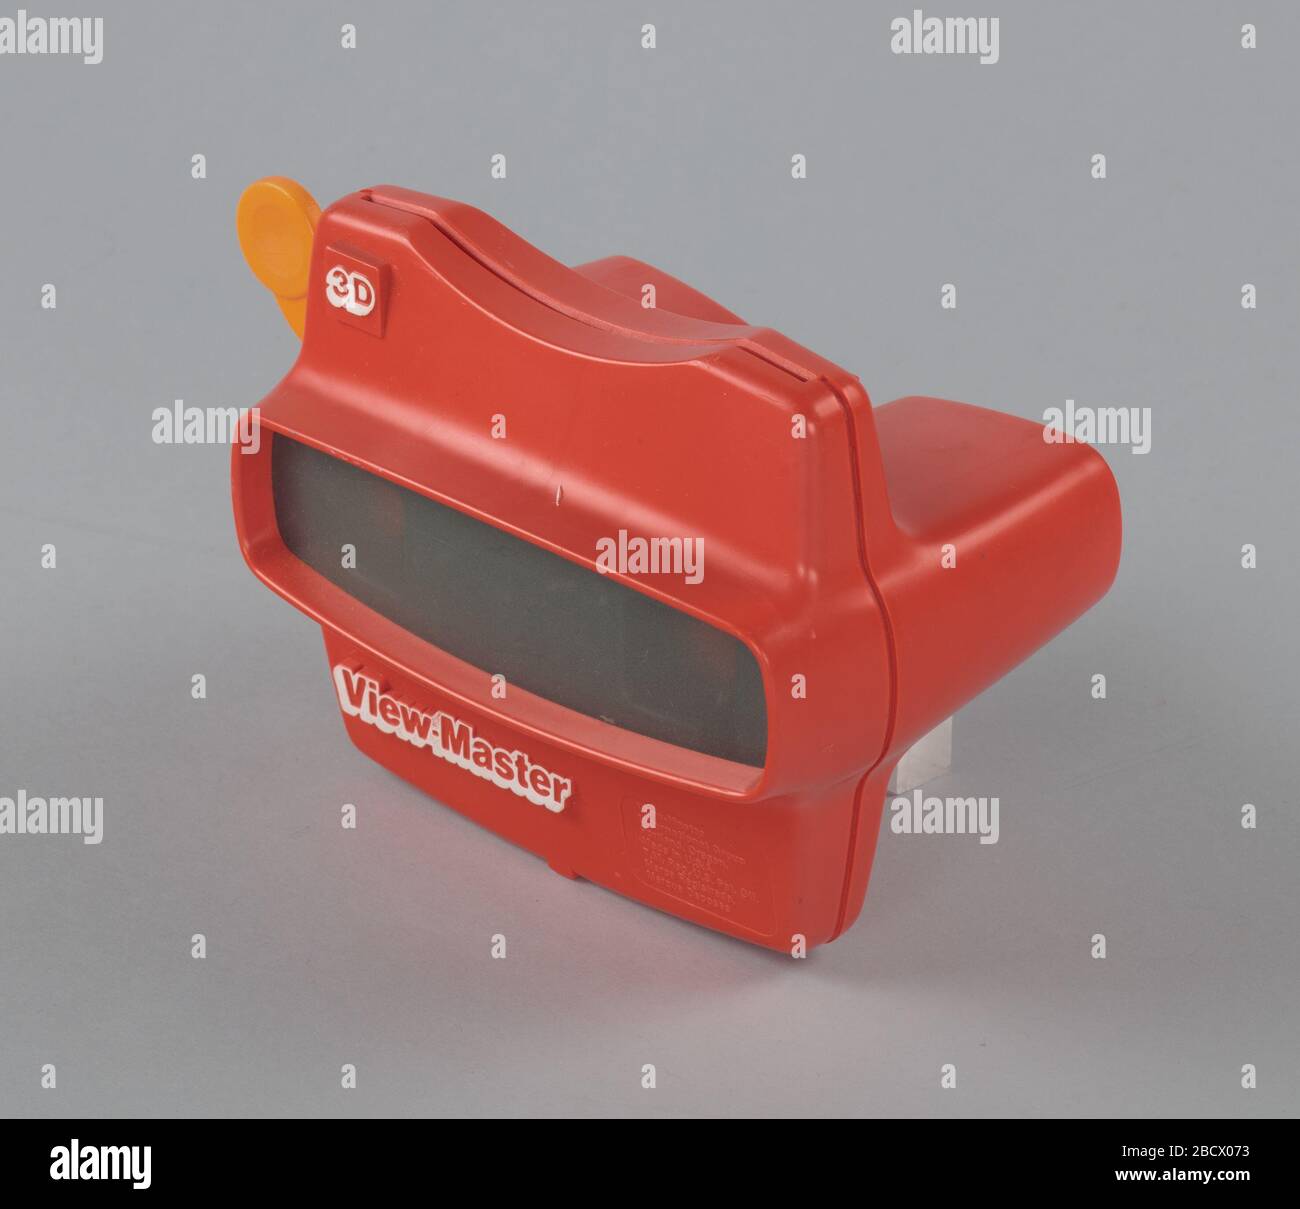 Mattel ViewMaster owned by Michael Holman. A red Mattel View